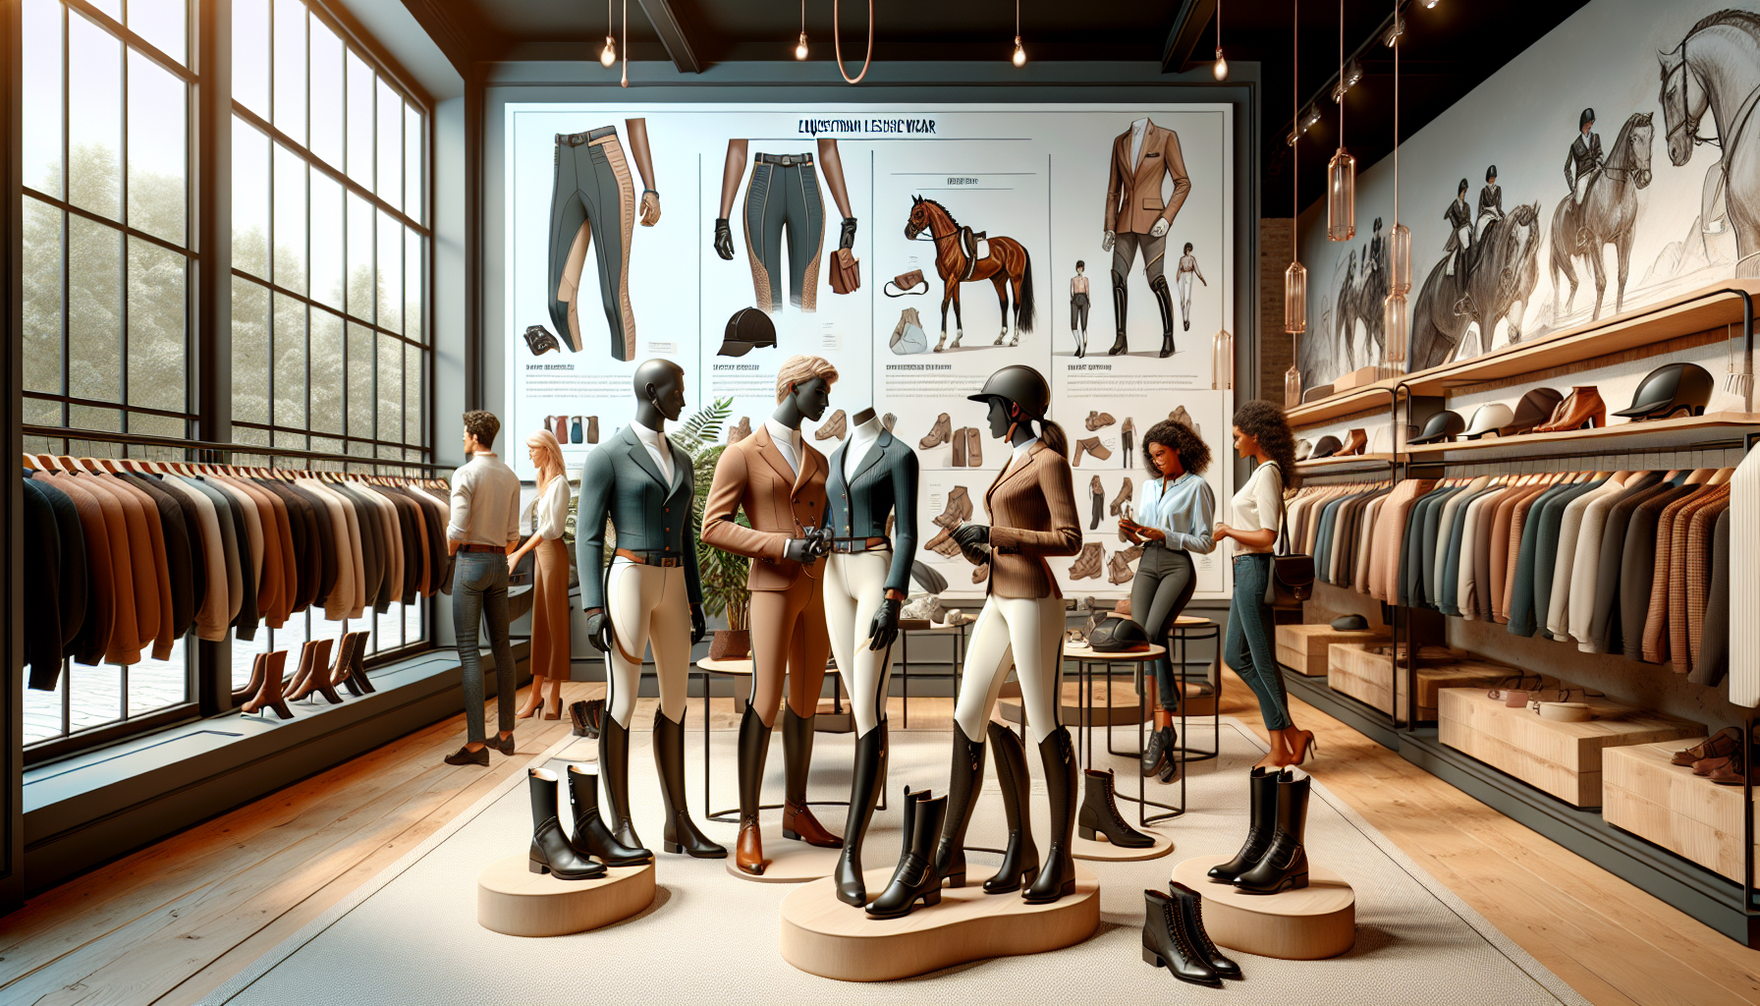 Imagine a sophisticated scene of equestrian leisure wear. From boots to breeches, from helmets to gloves all showcasing a harmonious blend of comfort and style. Picture a variety of outfits put togeth